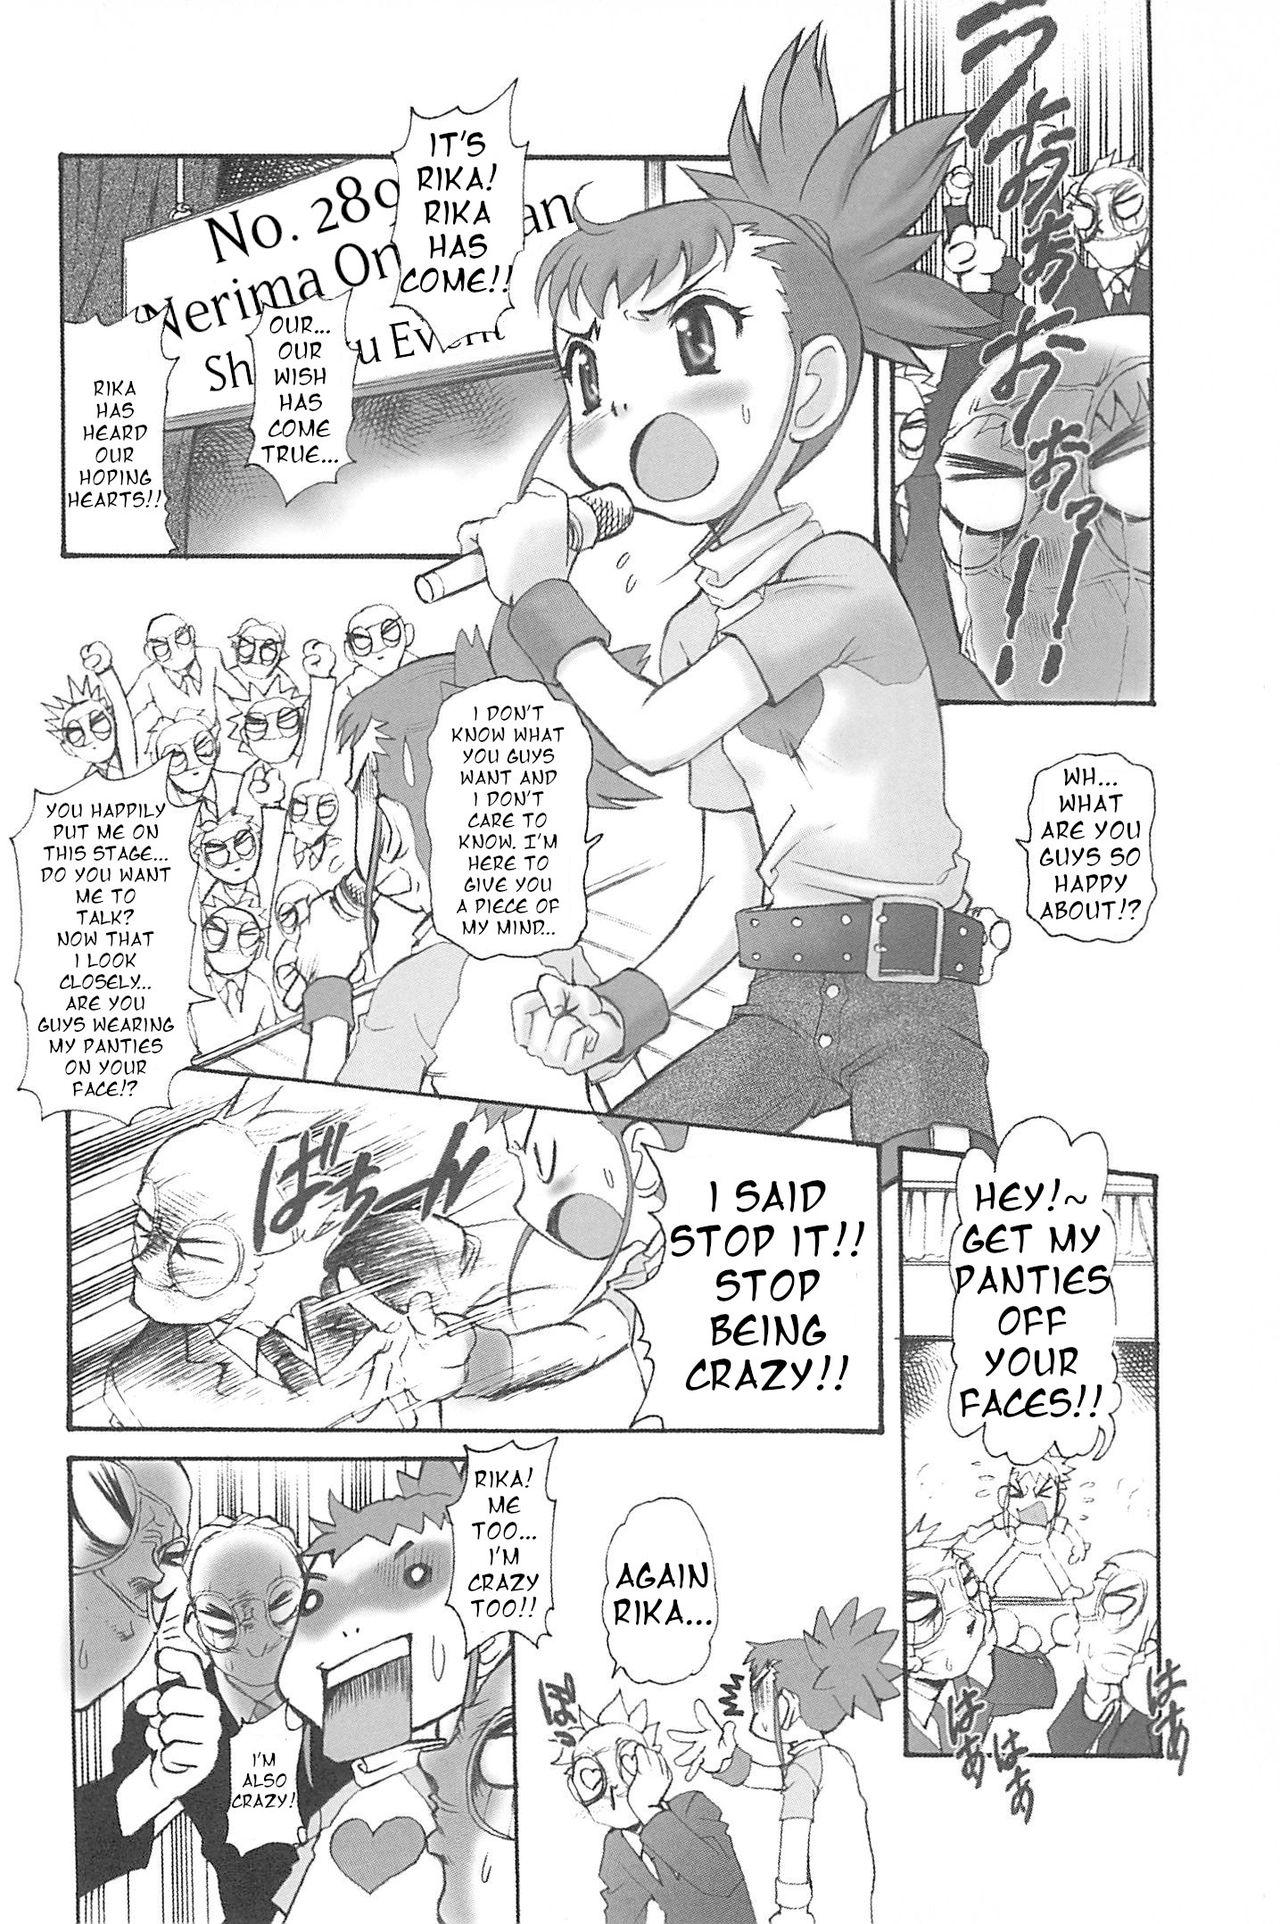 Oldyoung Cranial Business Trip! Nerima's Onii-chan!! - Digimon Digimon tamers High - Page 2